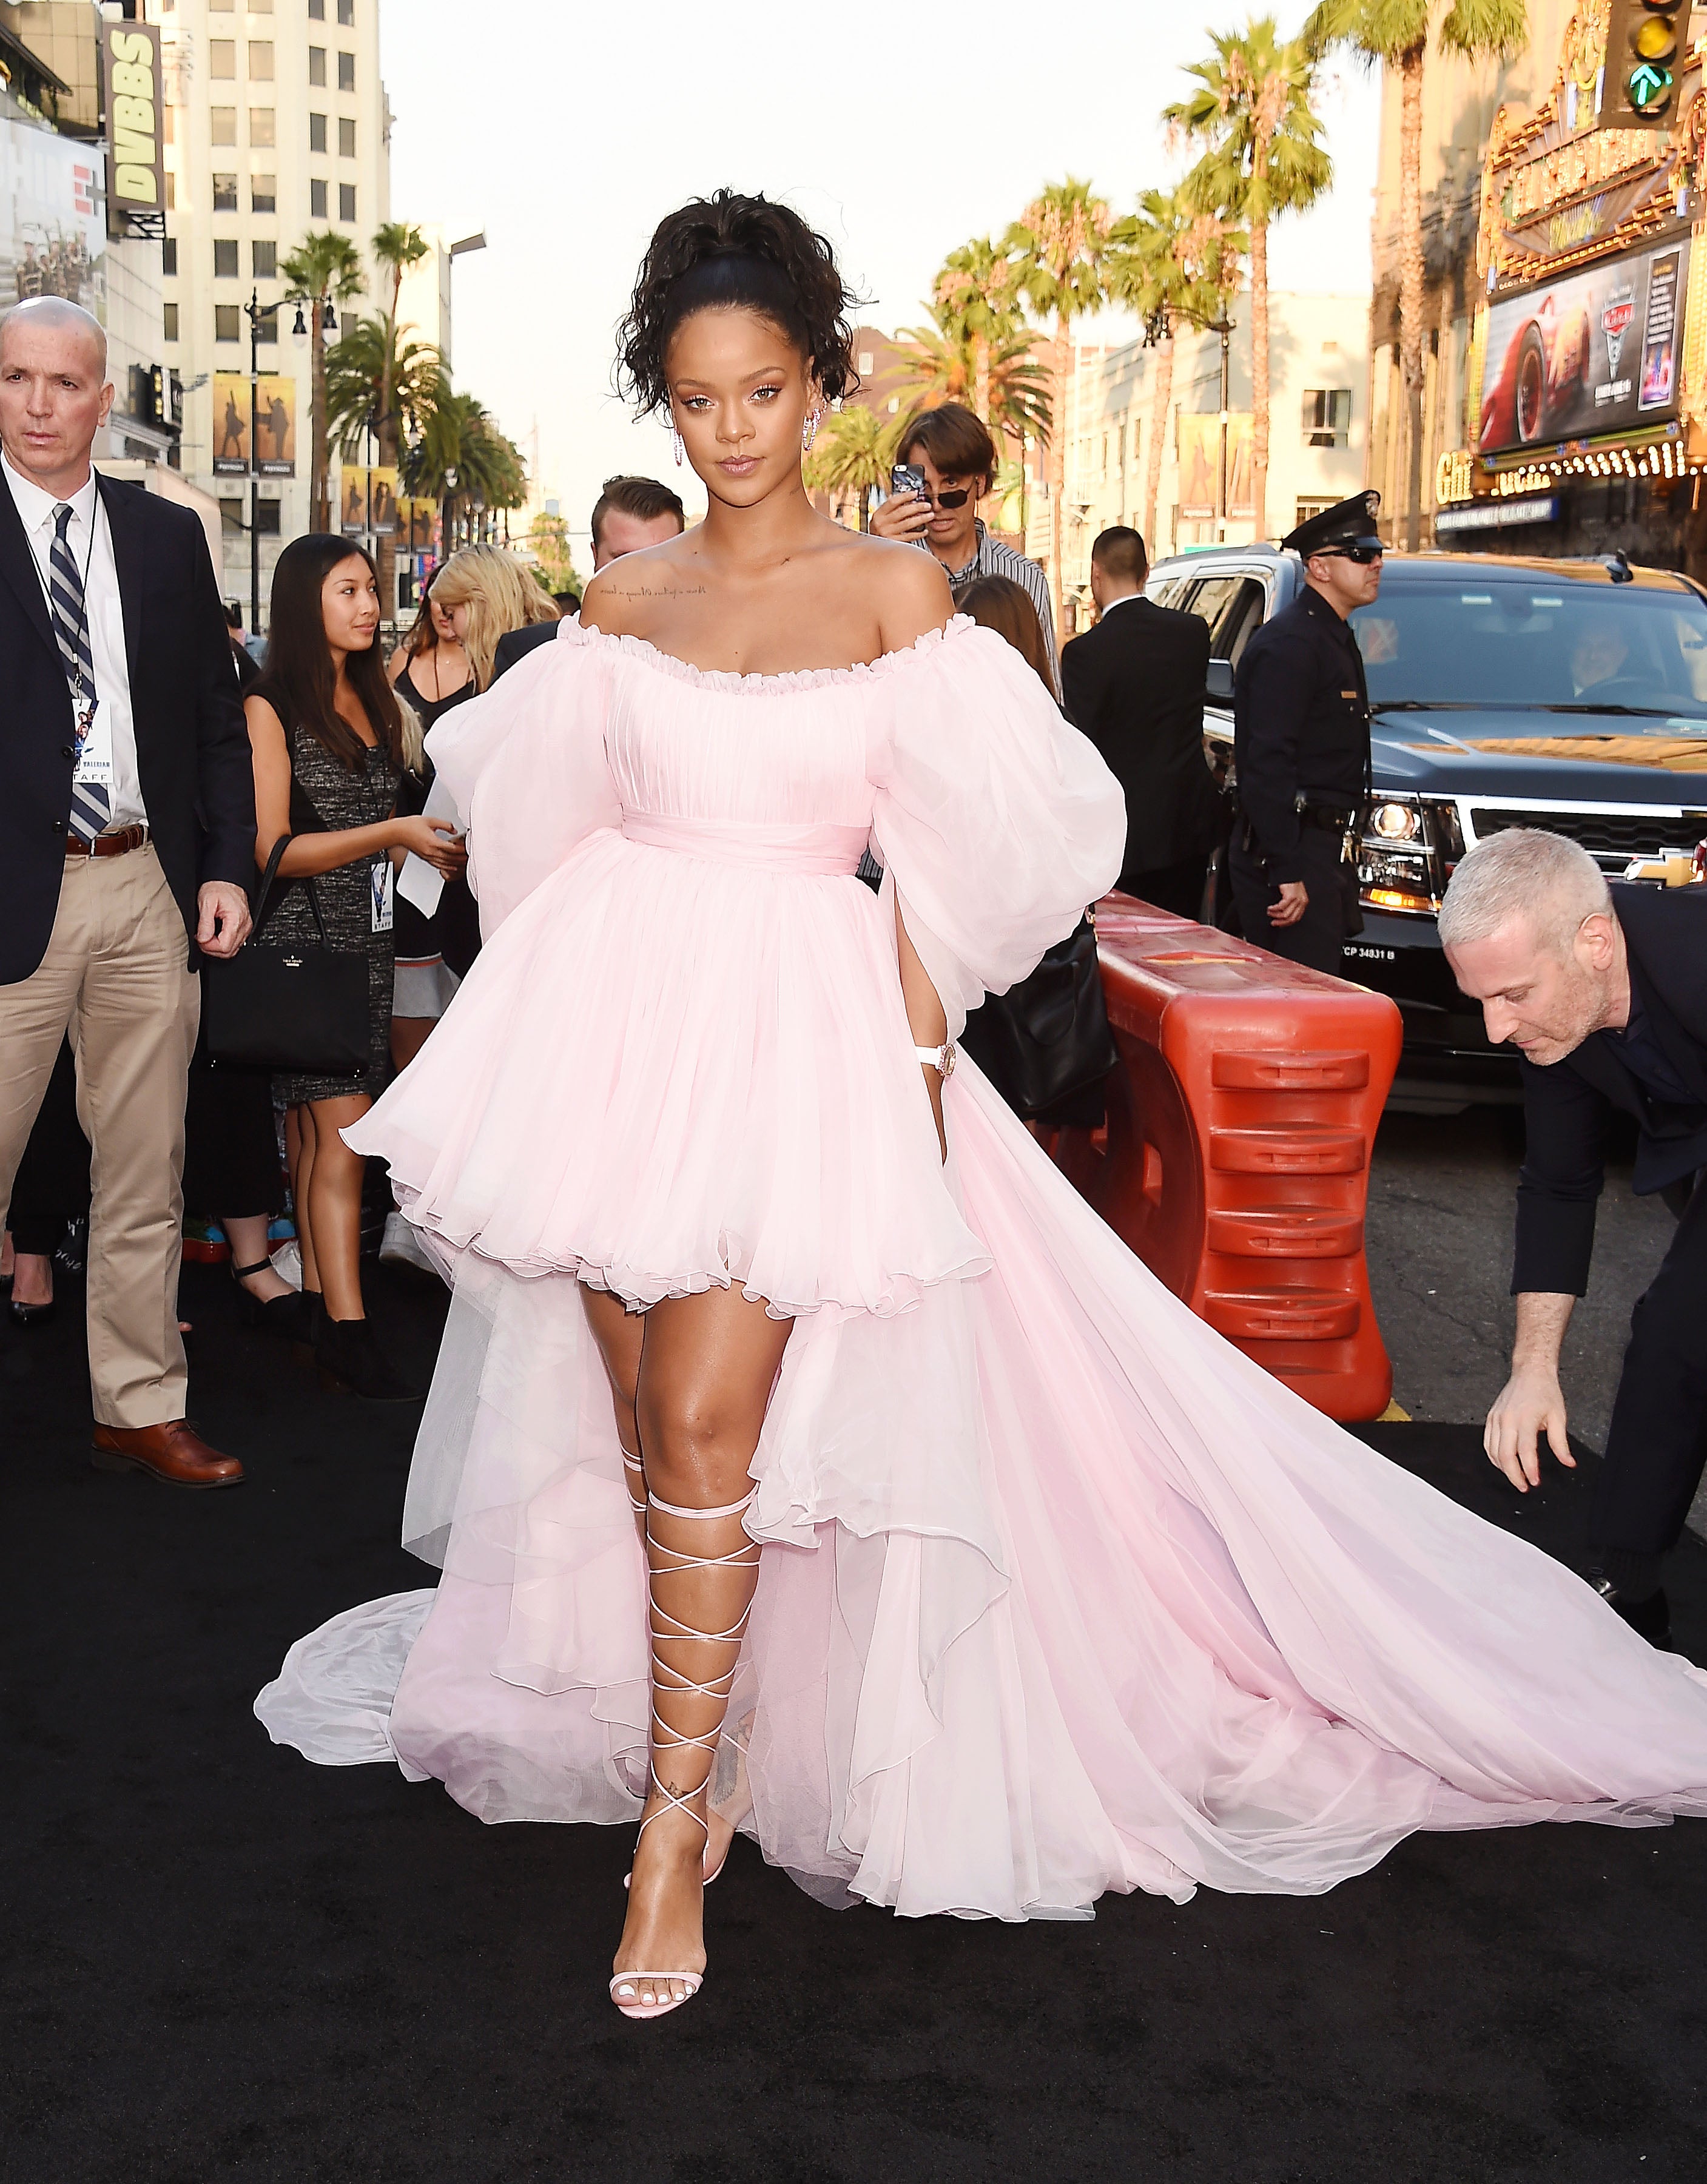 Rihanna Gives Ballerina Chic of Epic Proportions in Dazzling Pink Gown
